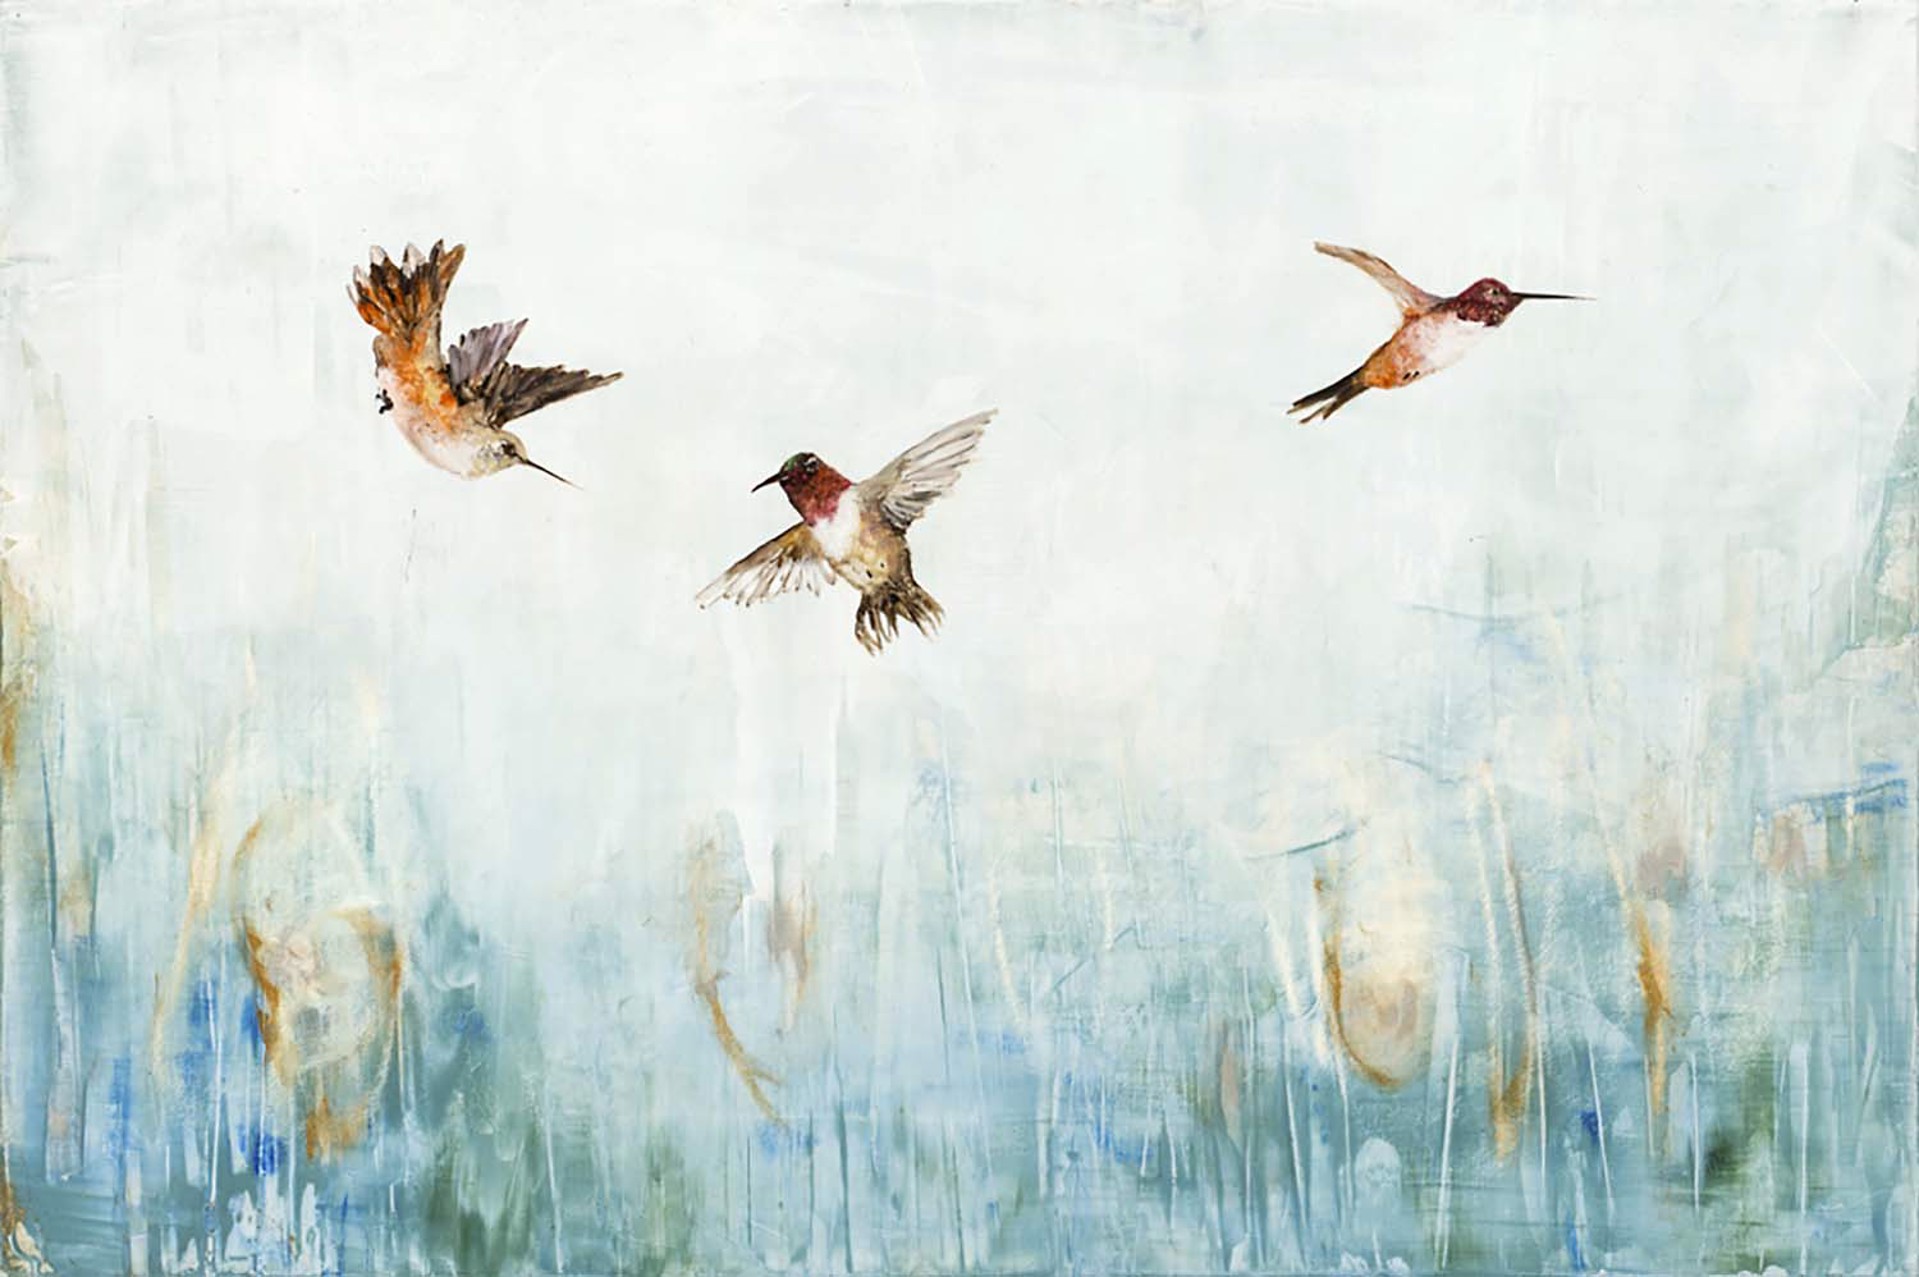 Oil On Panel By Jenna Von Benedikt Featuring Three Hummingbirds Against A Subtle Blue and White Abstract Background 